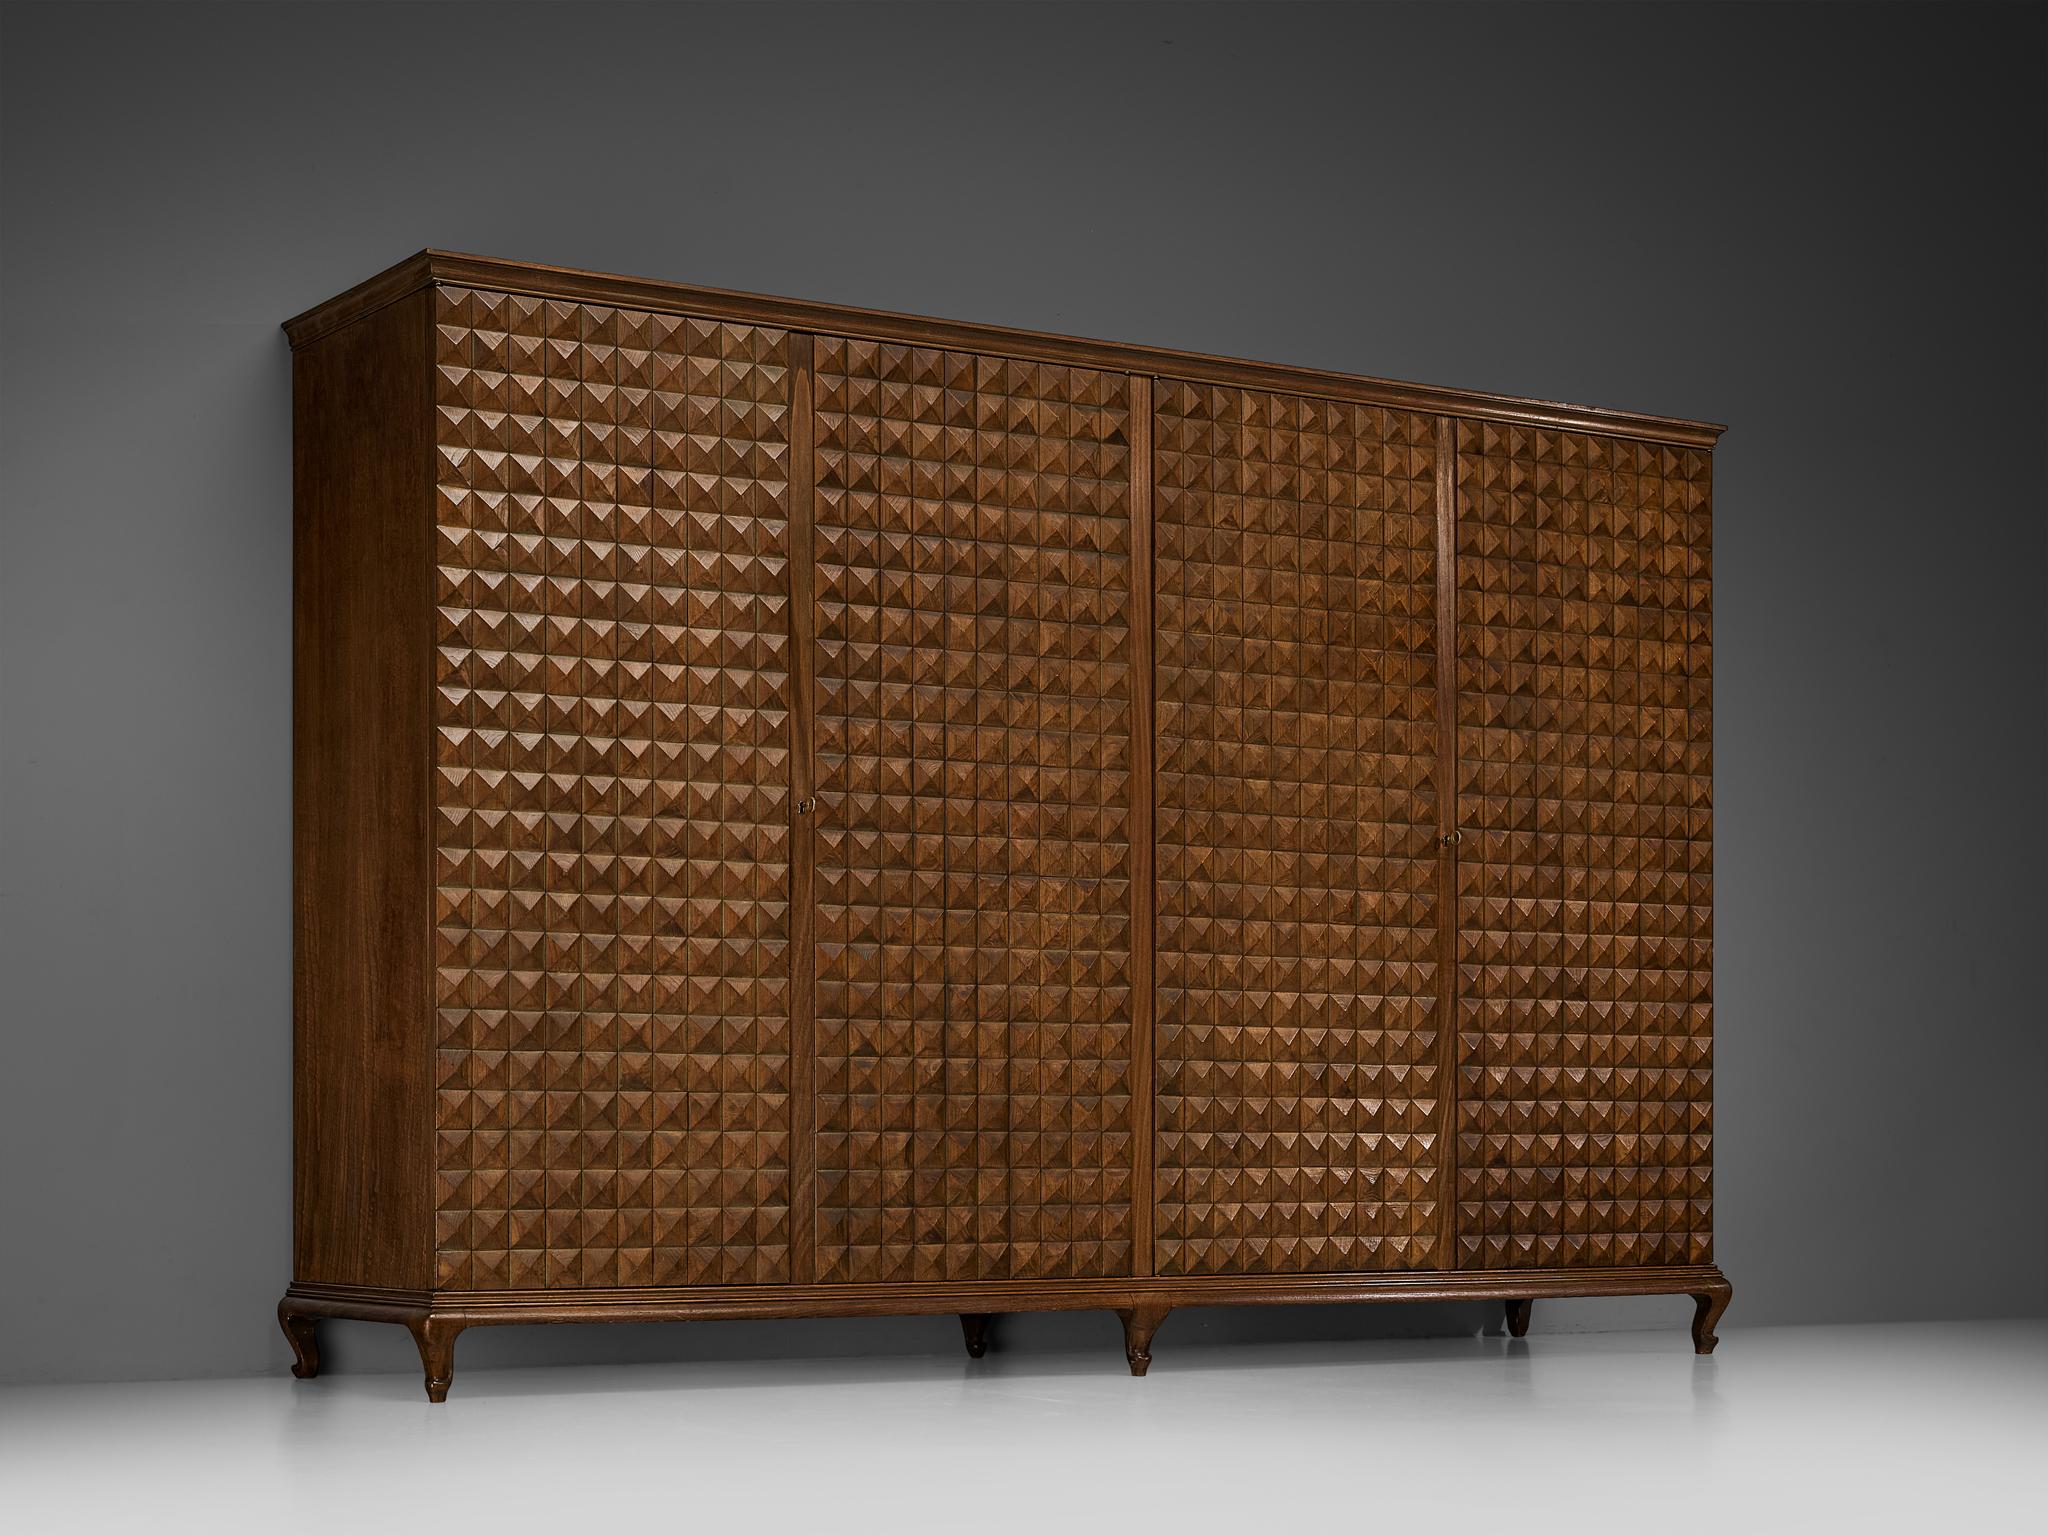 Wardrobe or high board, chestnut, Italy, 1950s

This grandiose Italian wardrobe exudes a commanding presence and boasts exquisite characteristics. When taking a moment to take in the beauty that this piece showcases, quickly the inspiring woodwork